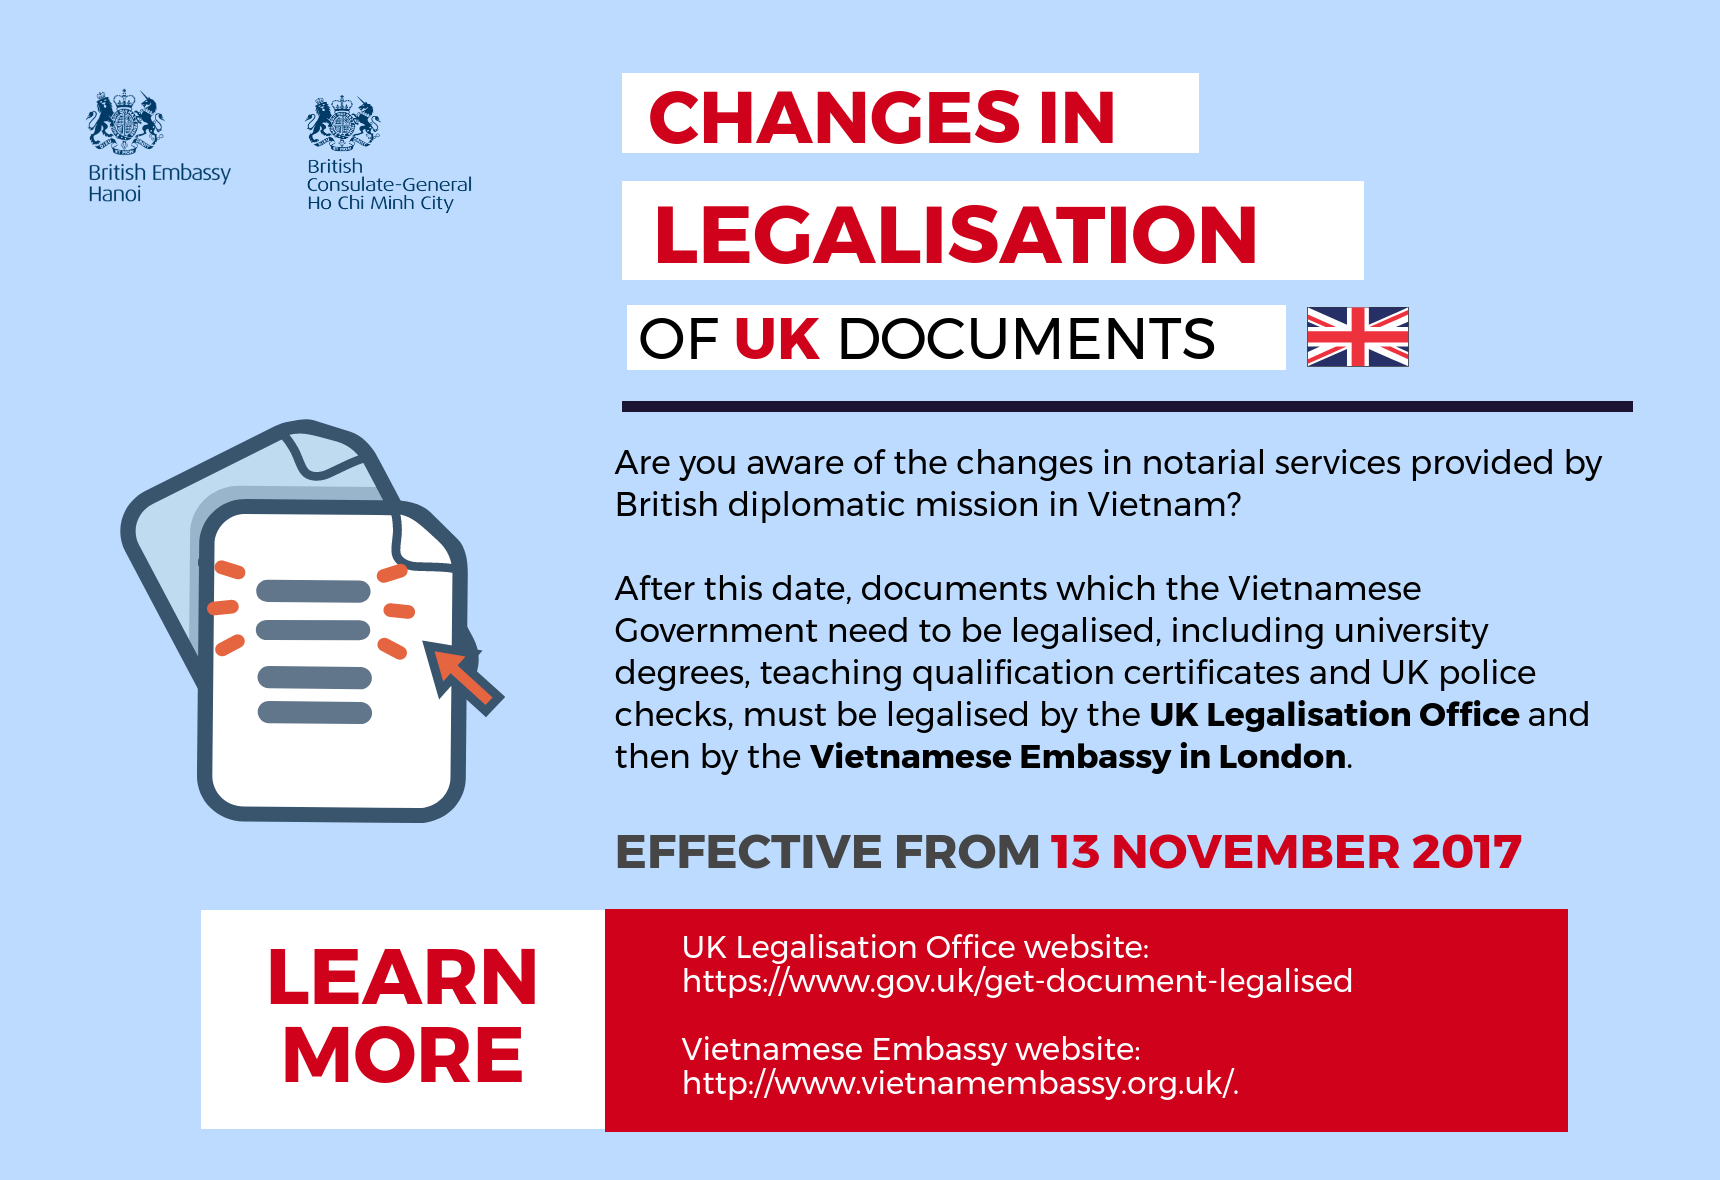 British Embassy in Vietnam changes notarial and documentary services